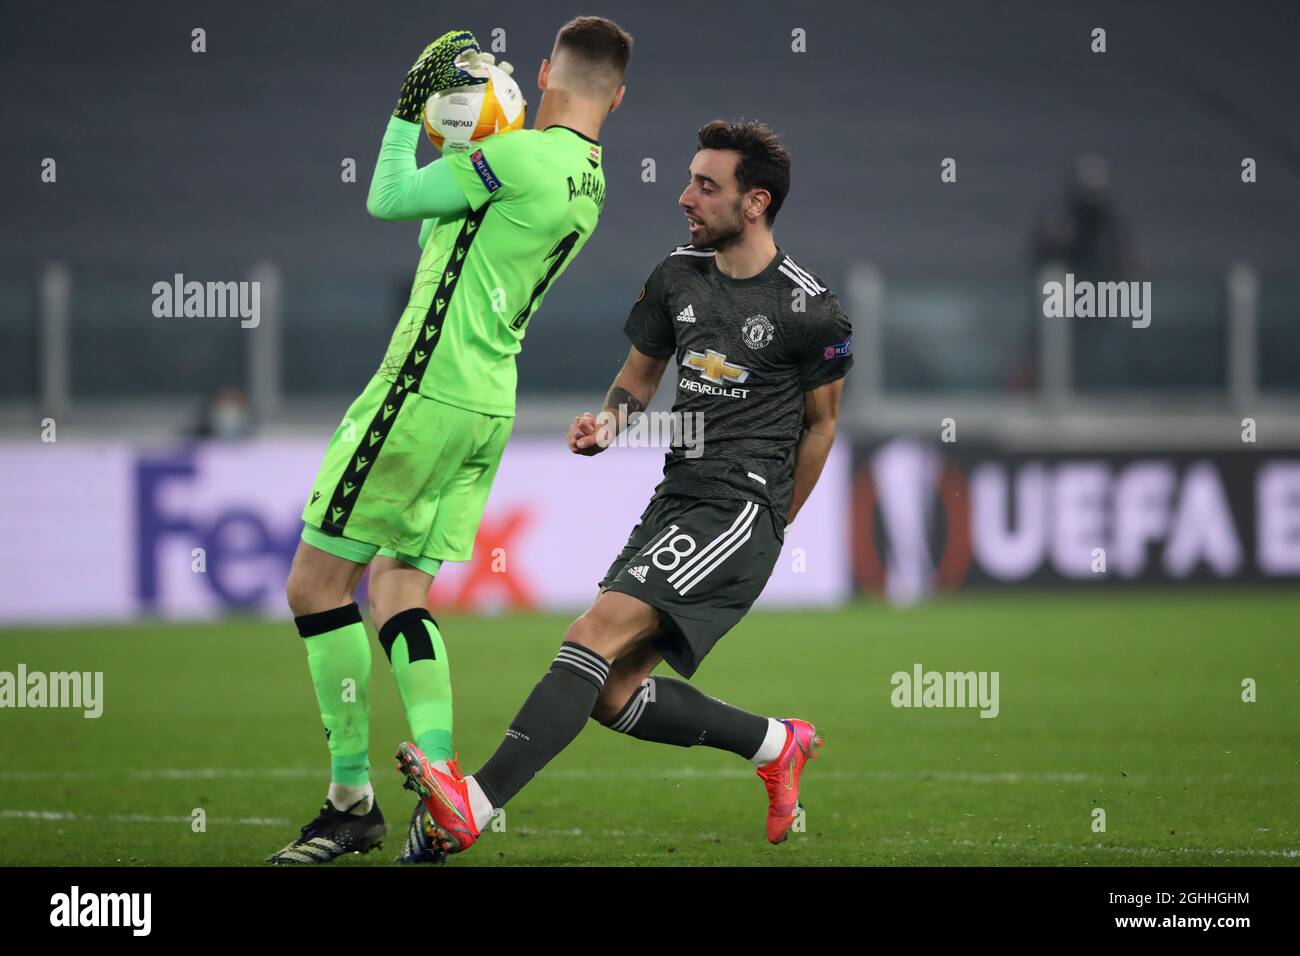 Alejandro Remiro of Real Sociedad. Gathers the ball as Bruno Fernandes of Manchester United bares down on goal during the UEFA Europa League match at Juventus Stadium, Turin. Picture date: 18th February 2021. Picture credit should read: Jonathan Moscrop/Sportimage via PA Images Stock Photo